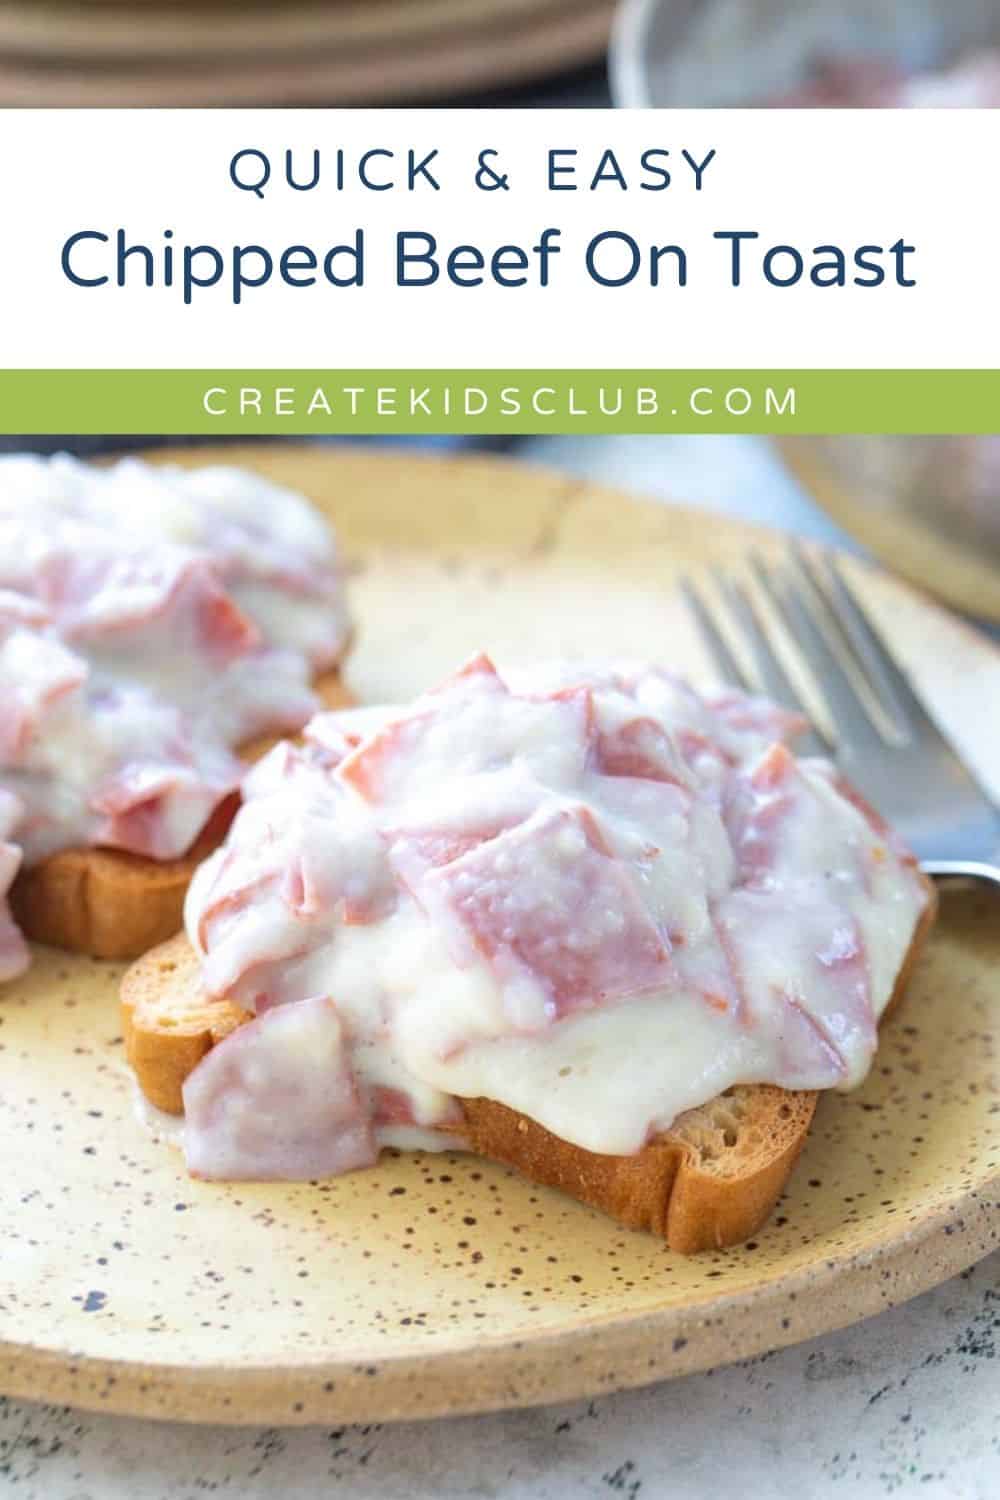 Pin of chipped beef on toast.